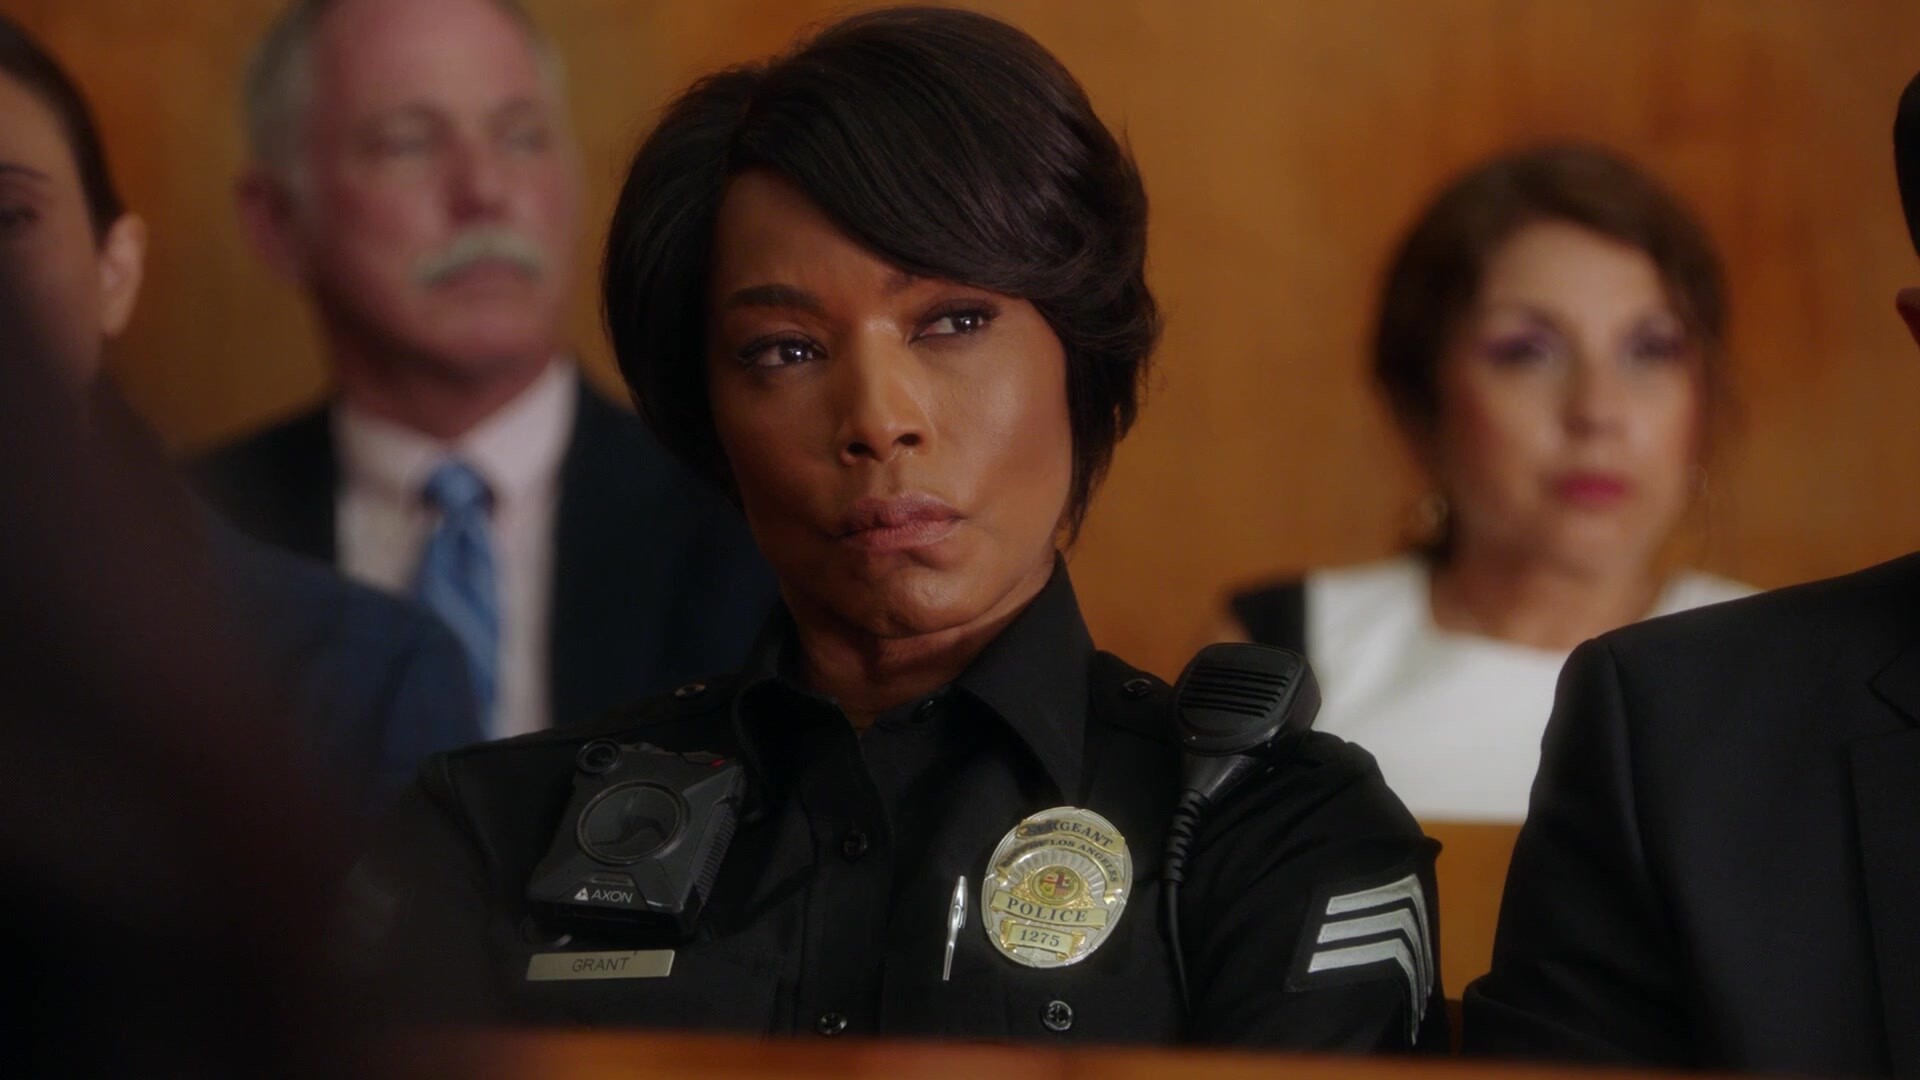 9-1-1 (TV Series): Sergeant Grant, Testimony In Court, Angela Bassett, Also Known For The Role Of Tina Turner In "What's Love Got to Do with It". 1920x1080 Full HD Background.